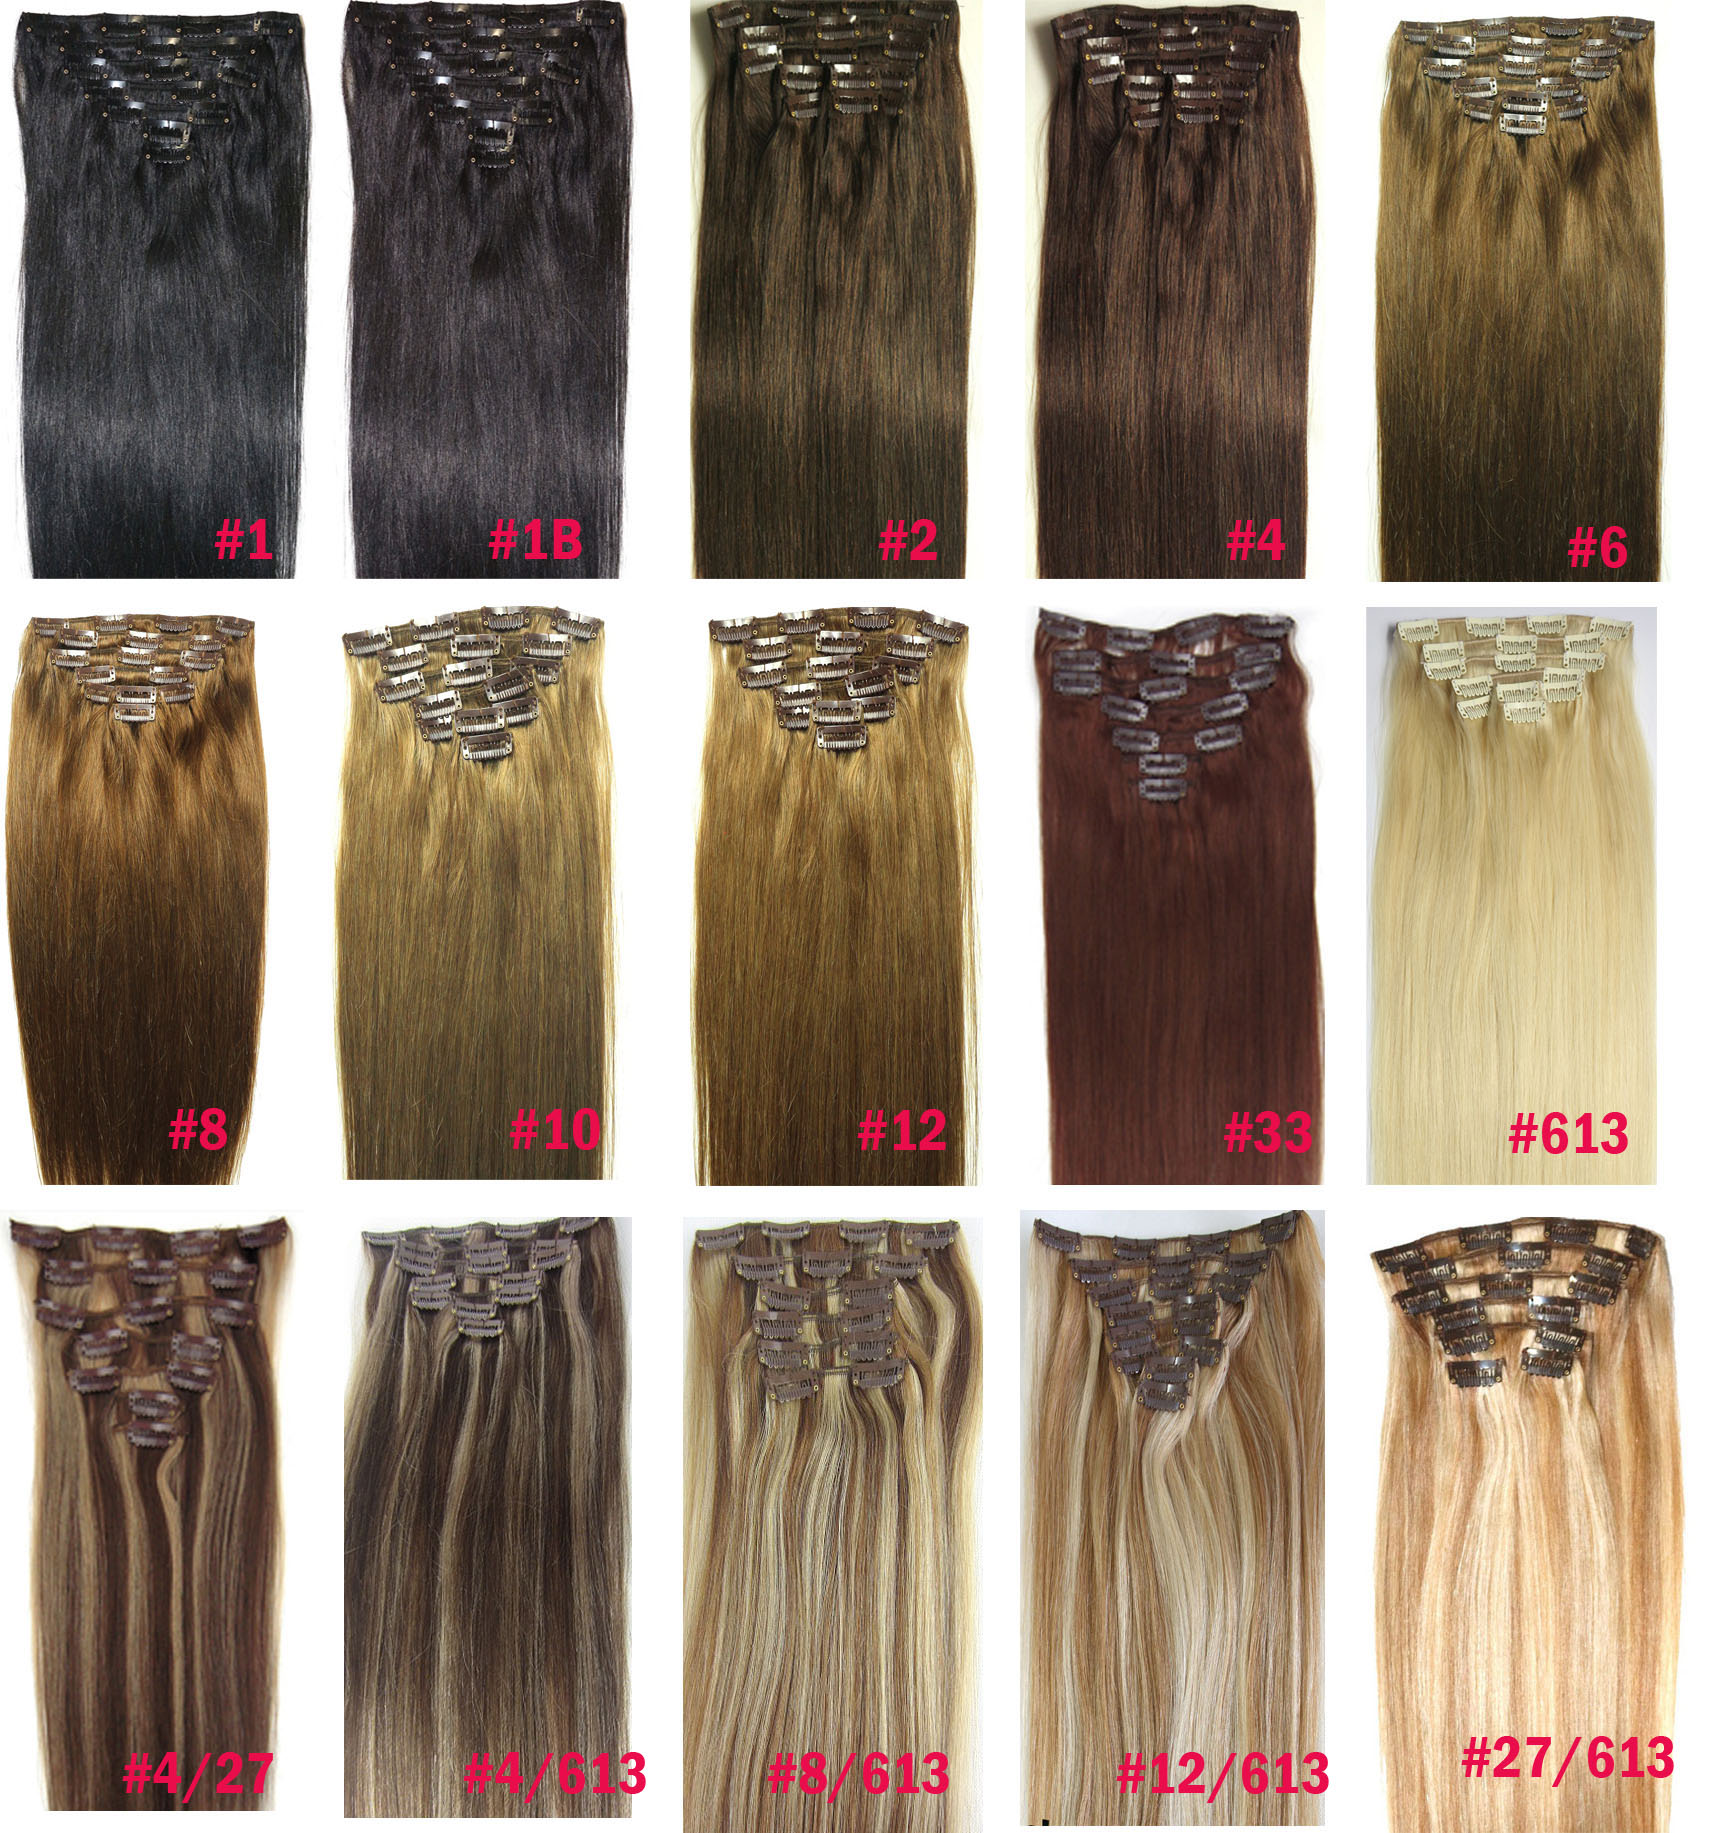 

ZZHAIR 16"-32" 8pcs Set Clips in/on 100% Brazilian Remy Human Hair Extension Full Head 100g 120g 140g Natural Straight